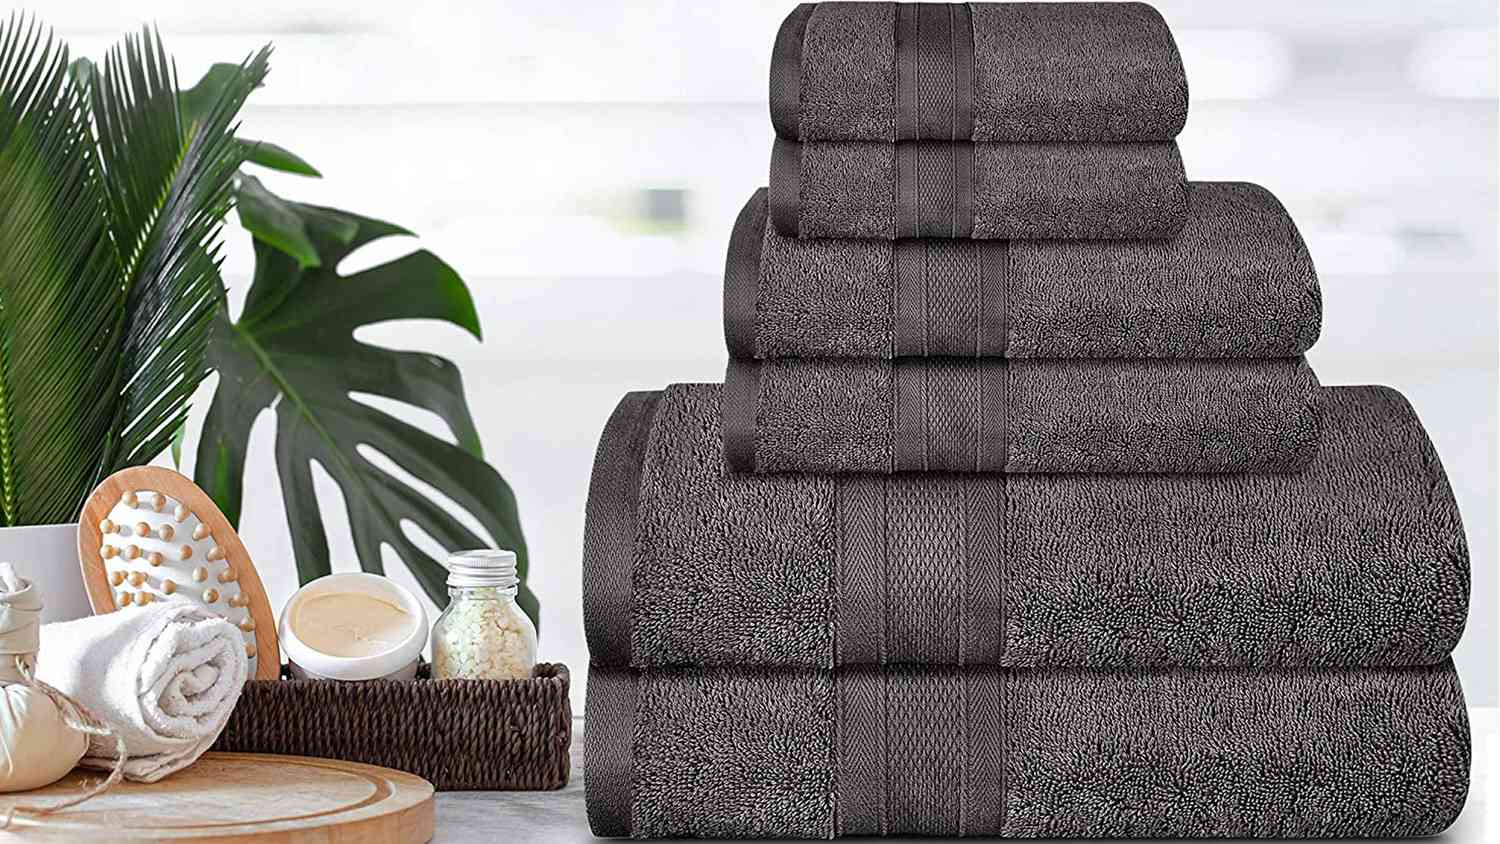 Super Soft TRIDENT TRISAFE Bath Towels 2 Piece Bath Towel Quick-Dry Highly Absorbent Easy Care Magnet Black